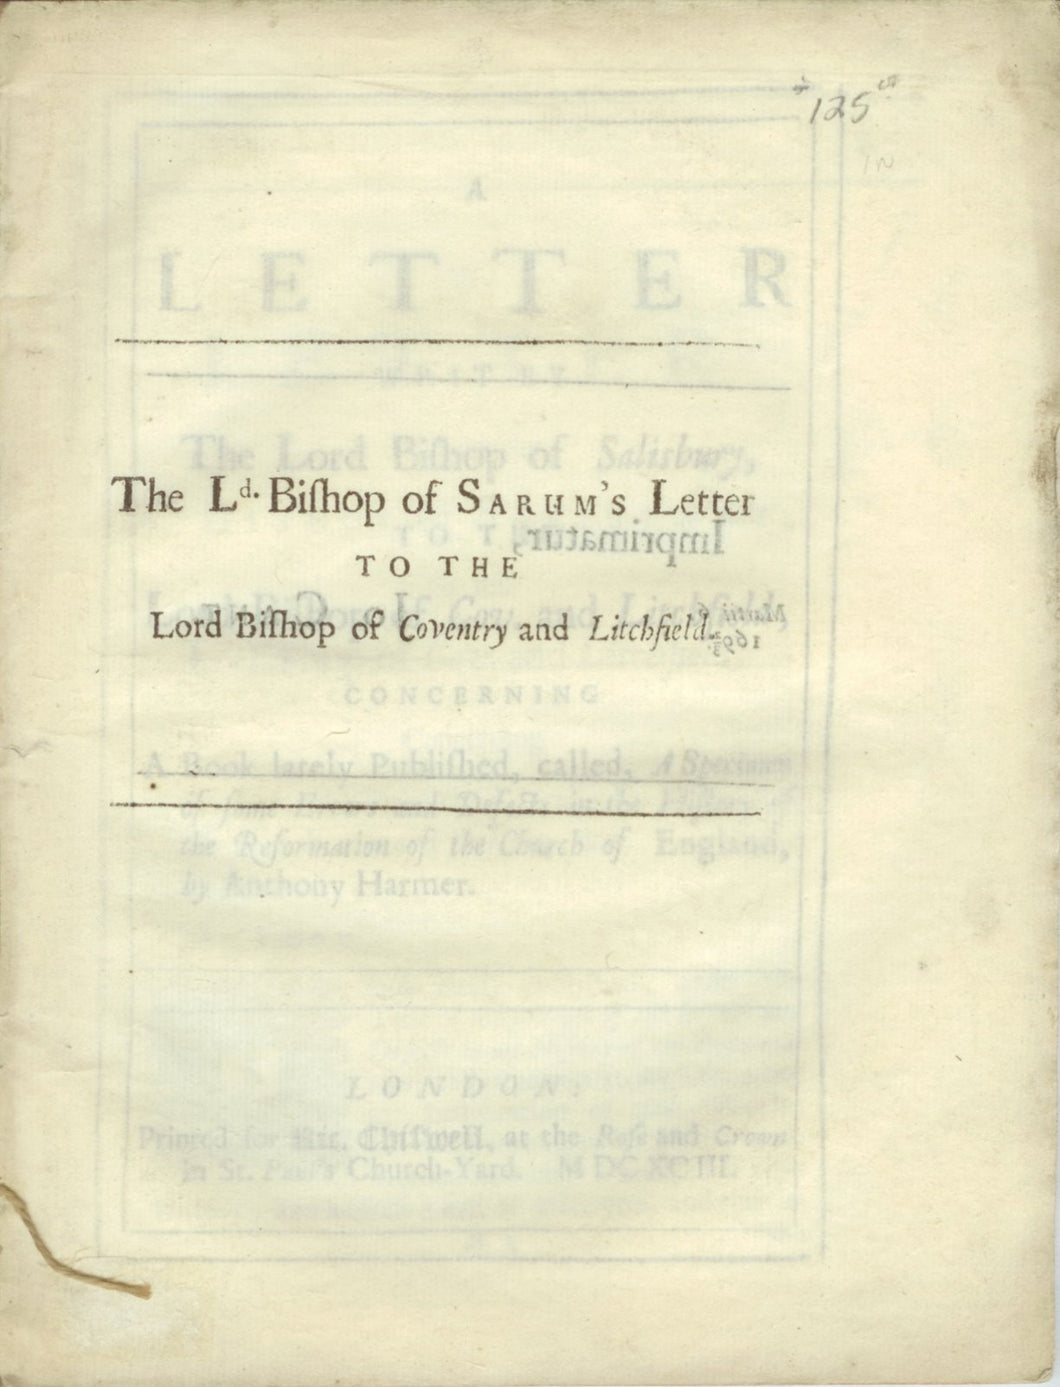 A Letter Writ by the Lord Bishop of Salisbury, to the Lord Bishop of Cov. and Litchfield, Concerning A Book Lately Published, called, A Specimen of some Errors and Defects in the History of the Reformation of the Church of England, by Anthony Harmer